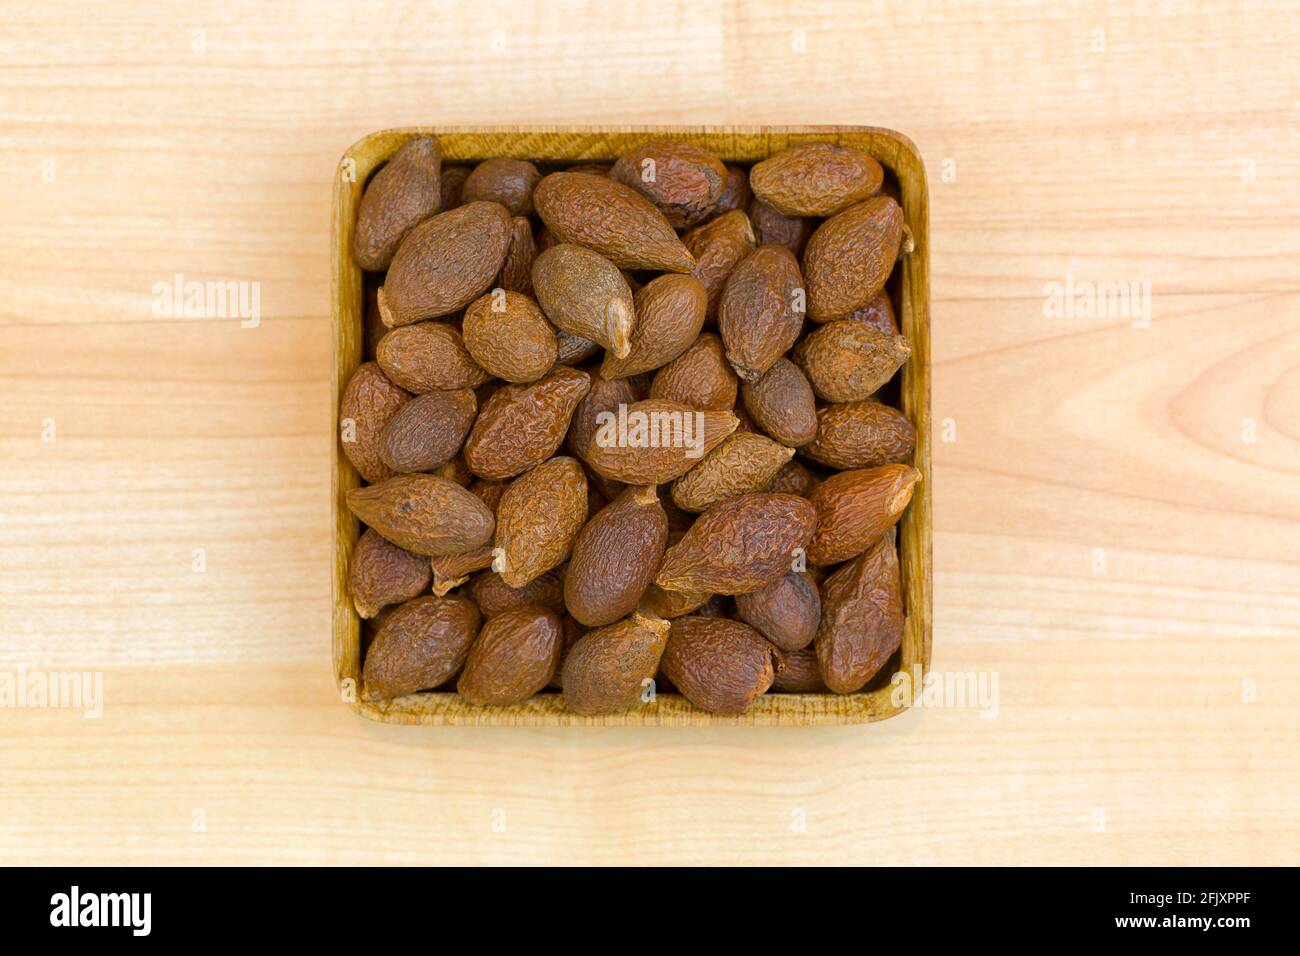 Dried seeds of Malva nut (Taiwan sweet gum) used in traditional Chinese medicine, top view on wooden background (Scaphium affine) Stock Photo